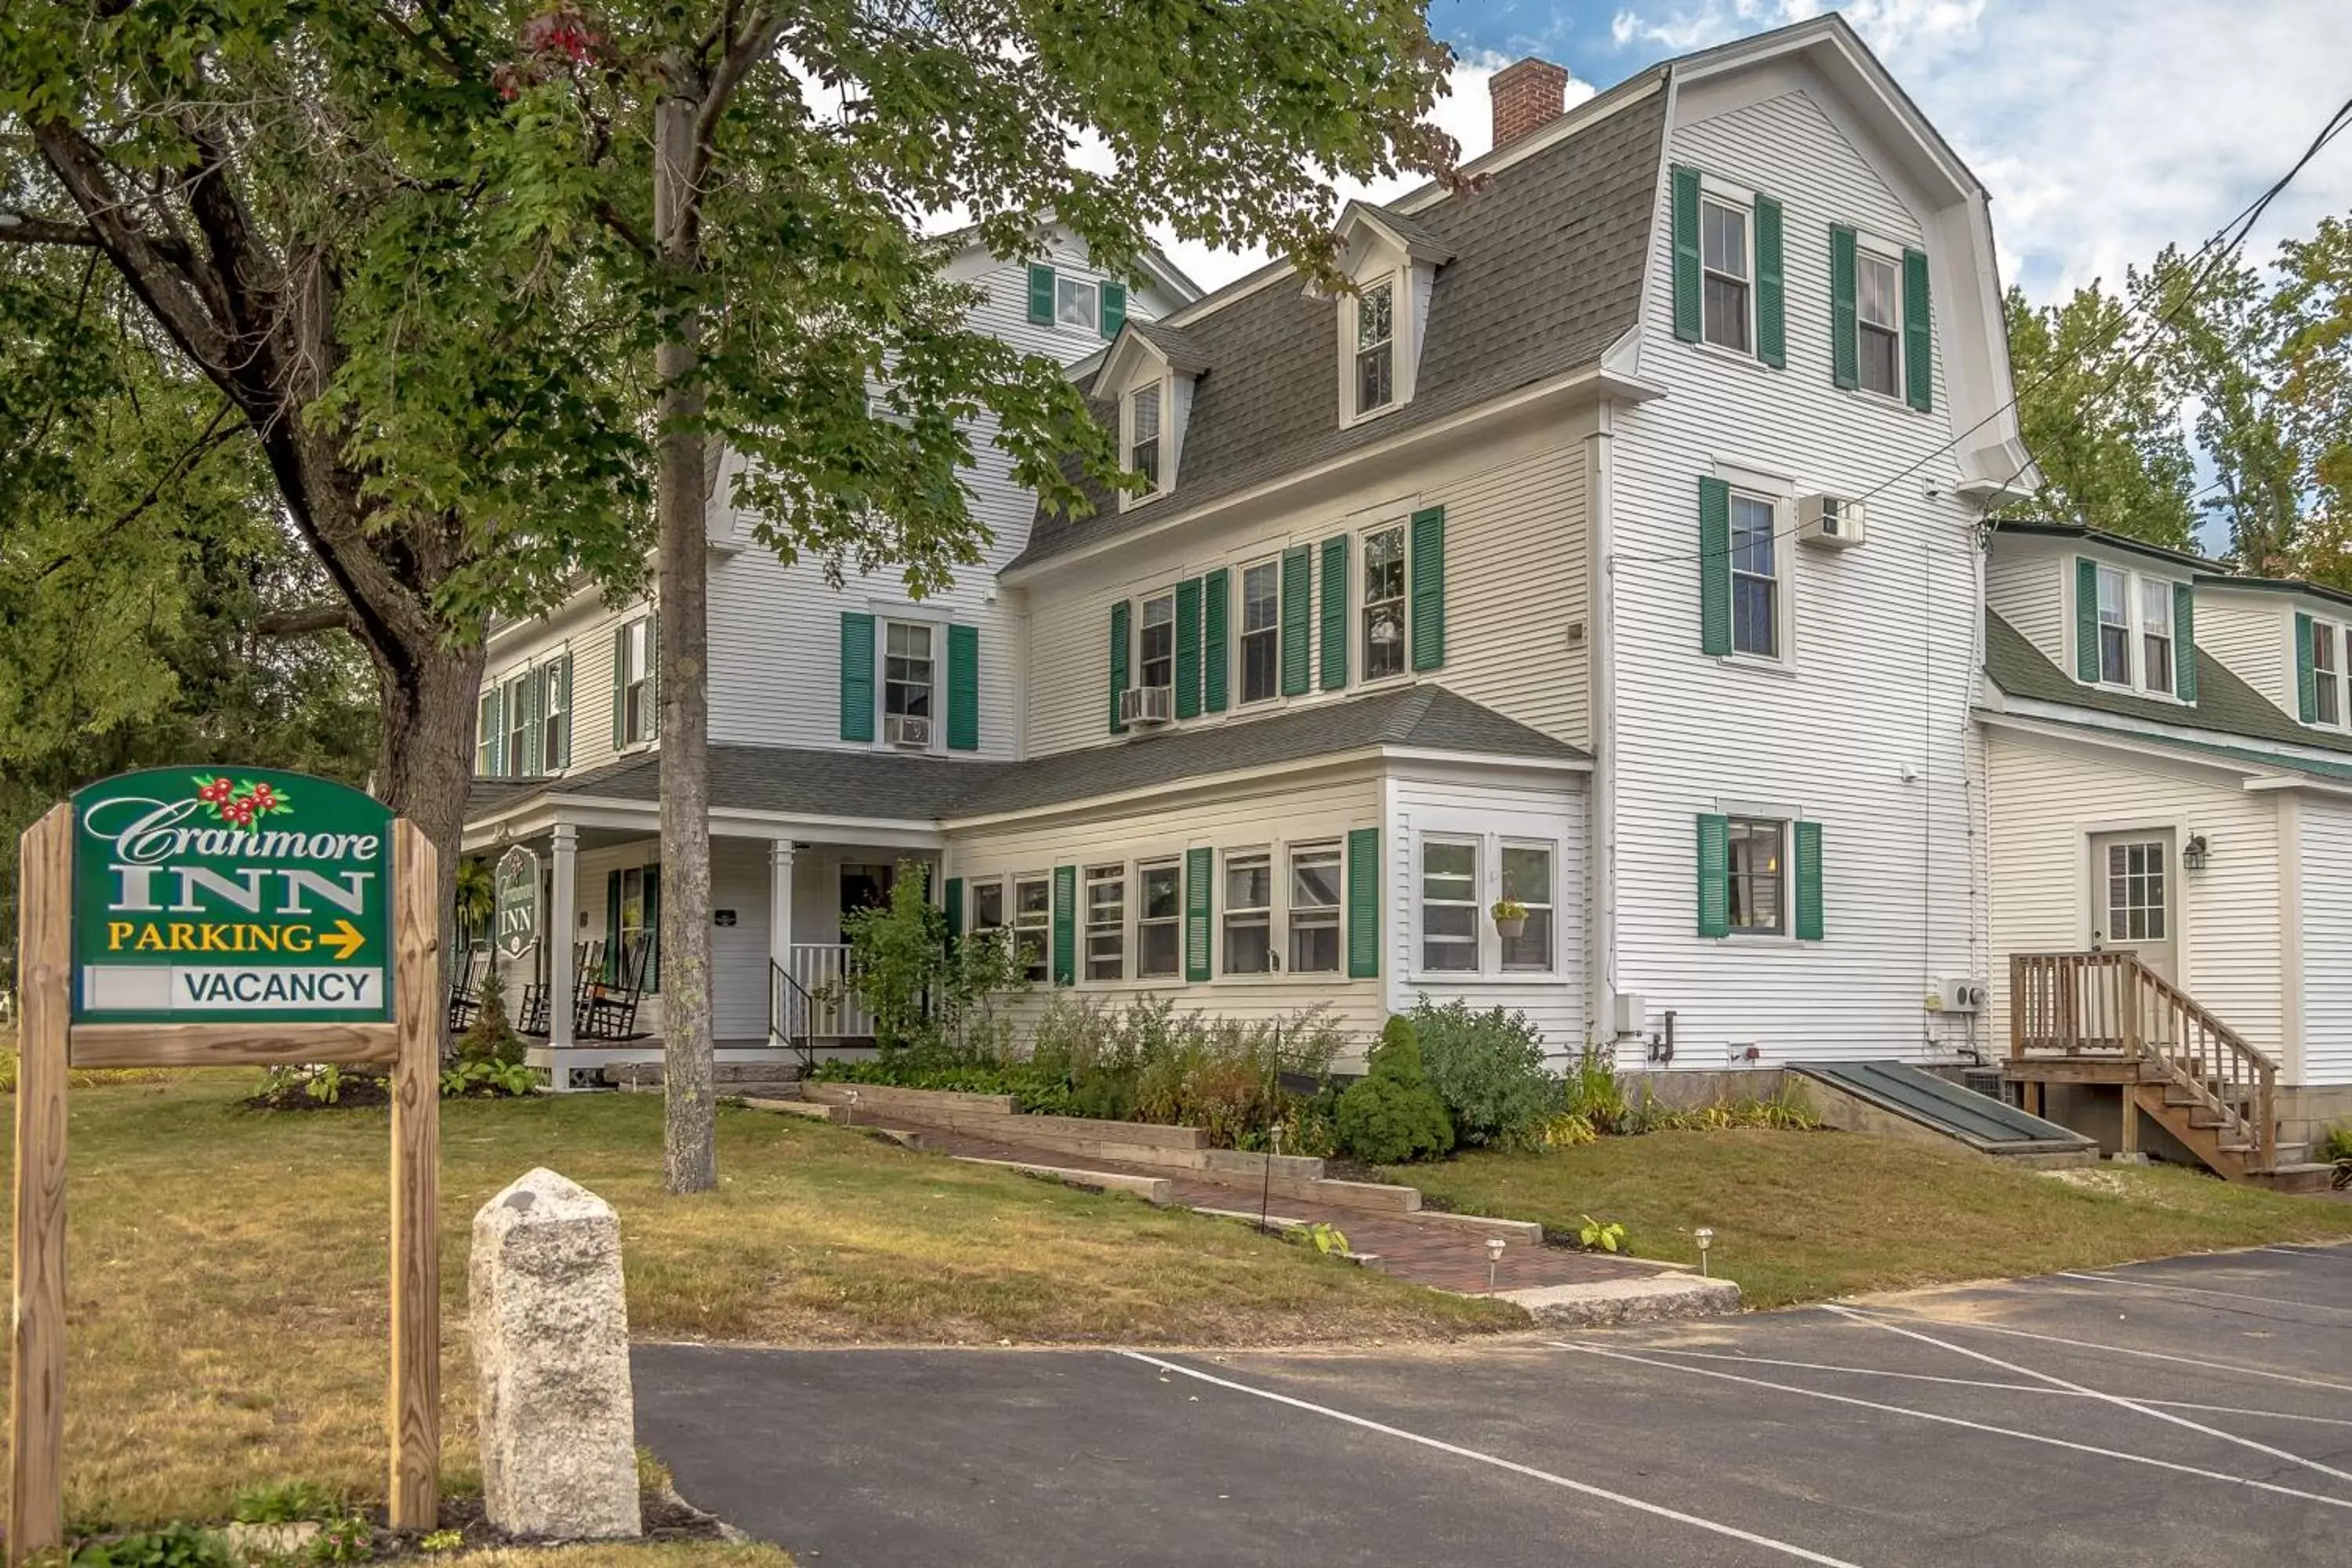 Property Building in Cranmore Inn and Suites, a North Conway boutique hotel